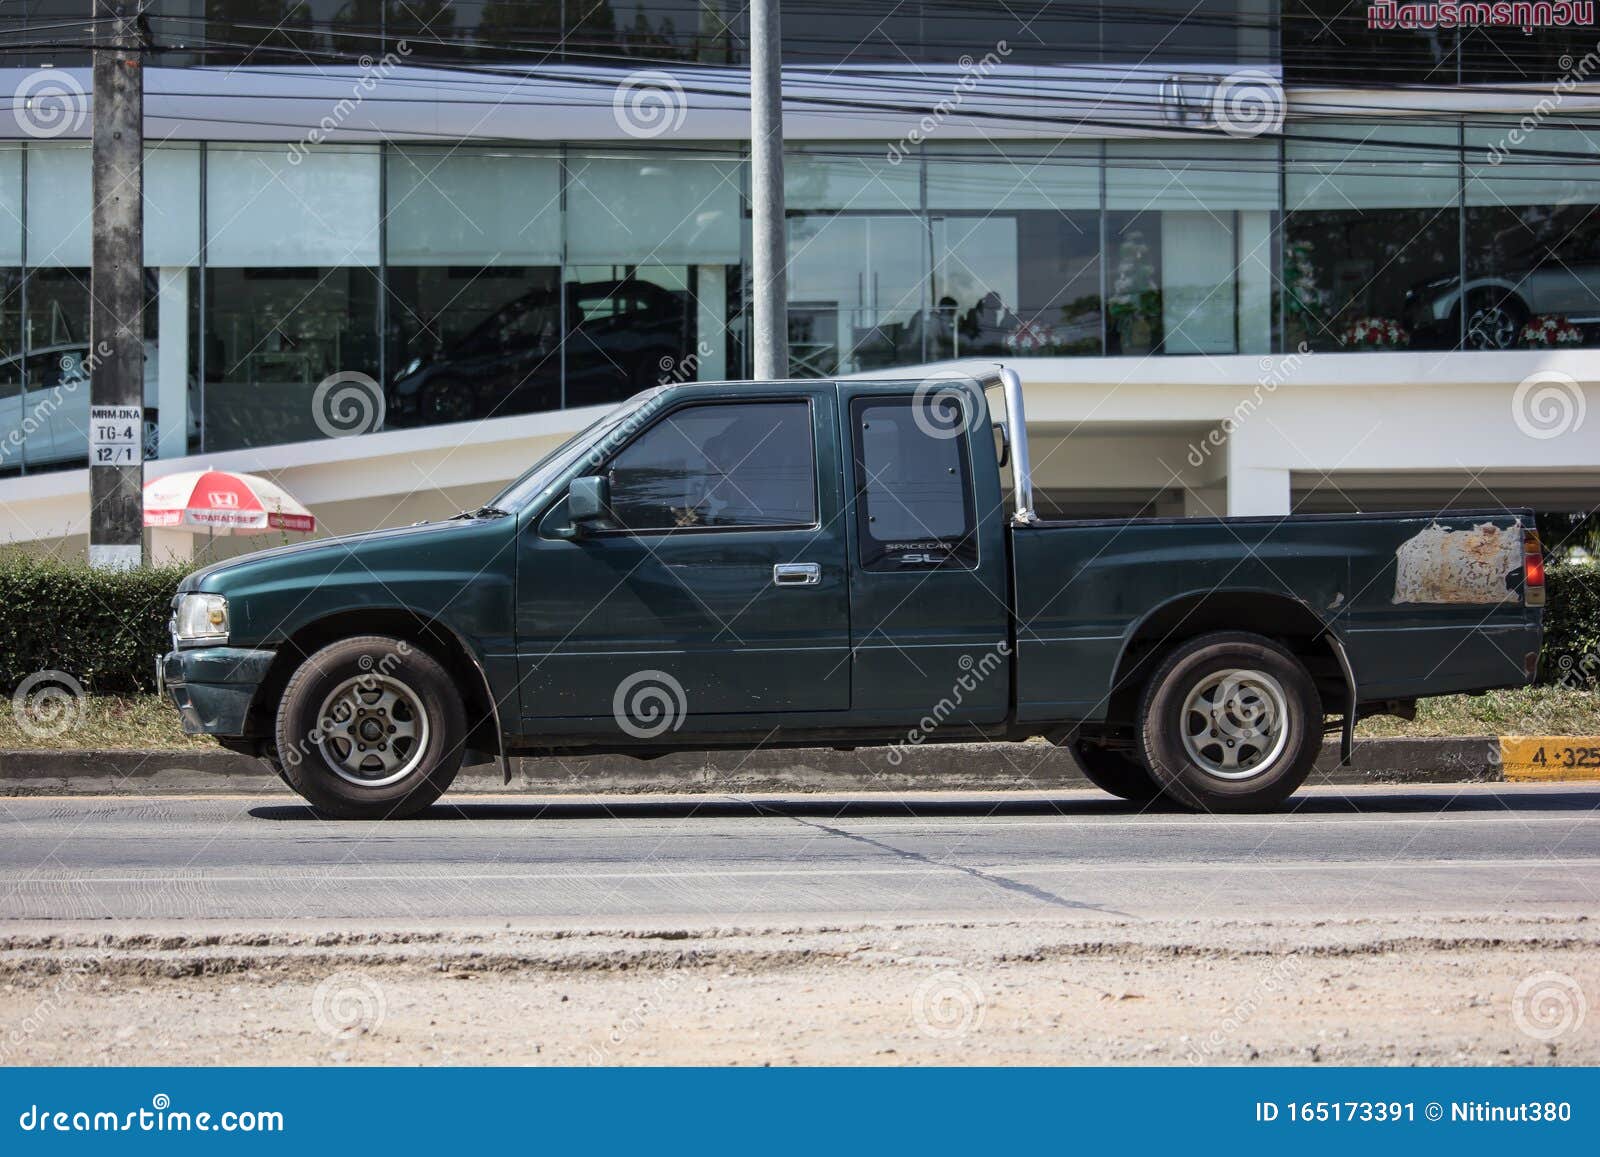 Download 1 002 Isuzu Pickup Photos Free Royalty Free Stock Photos From Dreamstime Yellowimages Mockups